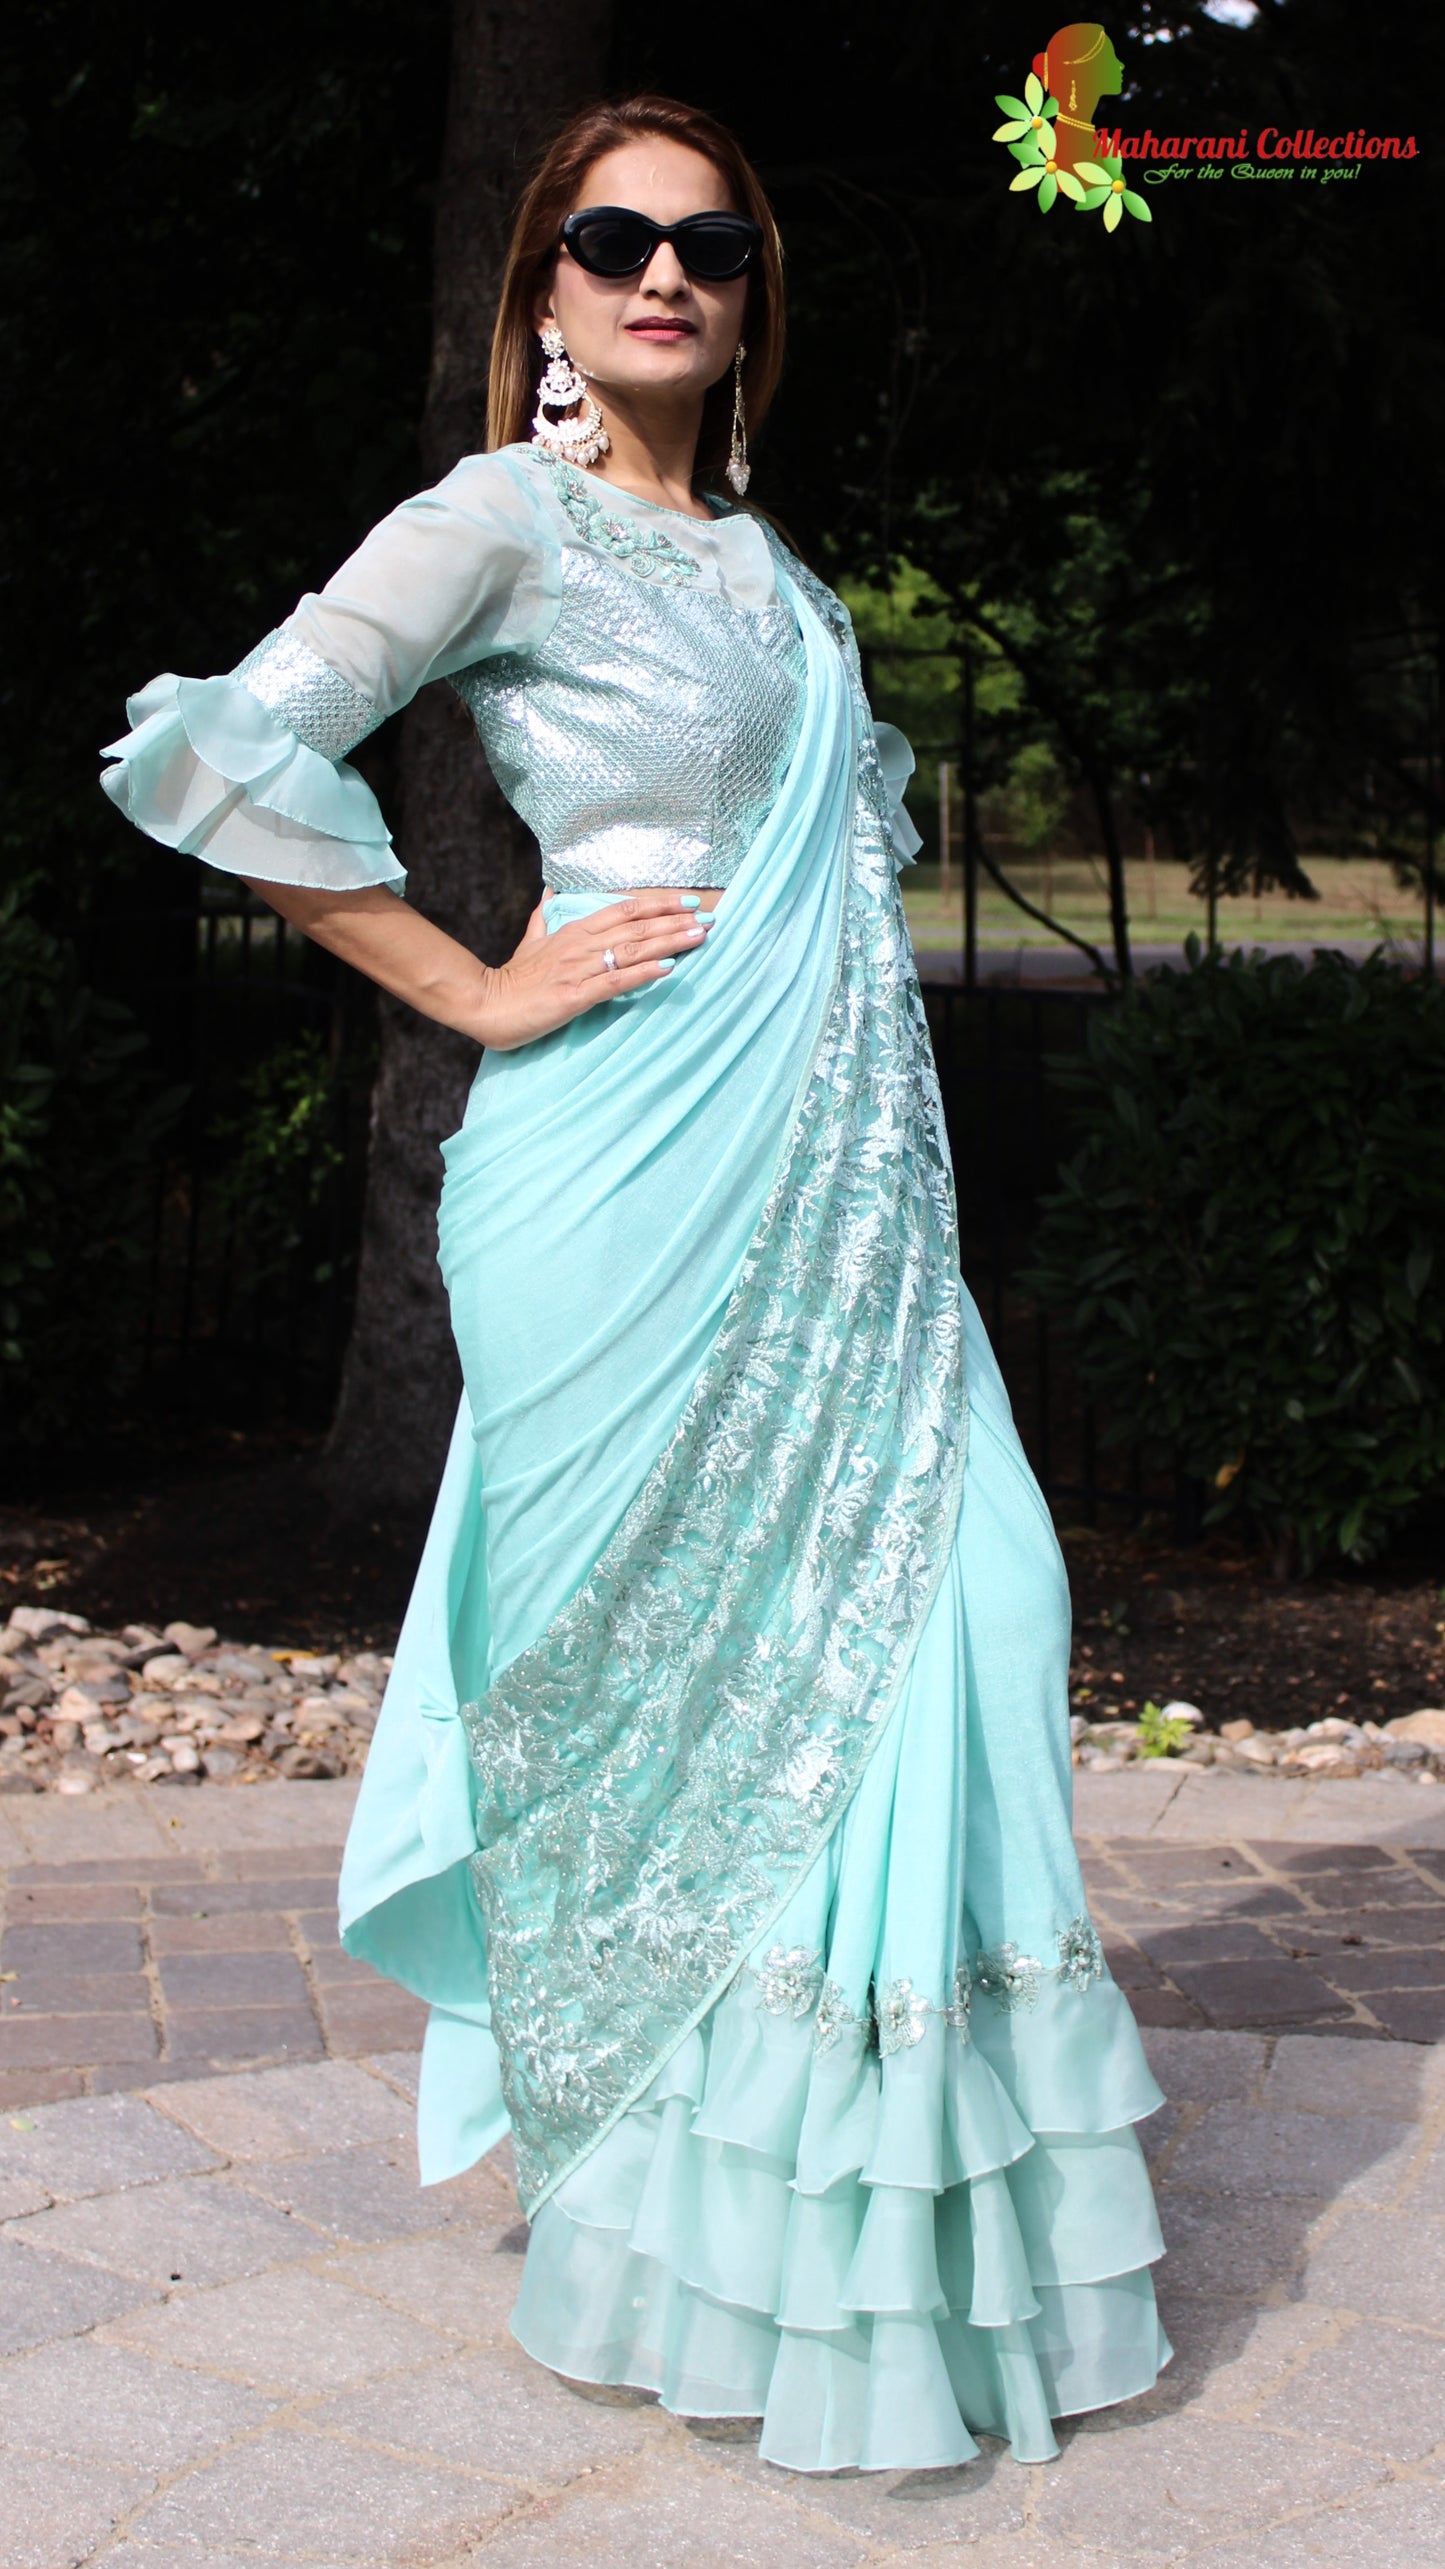 Maharani's Party Wear Stitched Designer Saree - Turquoise Blue (with stitched Blouse & Petticoat)